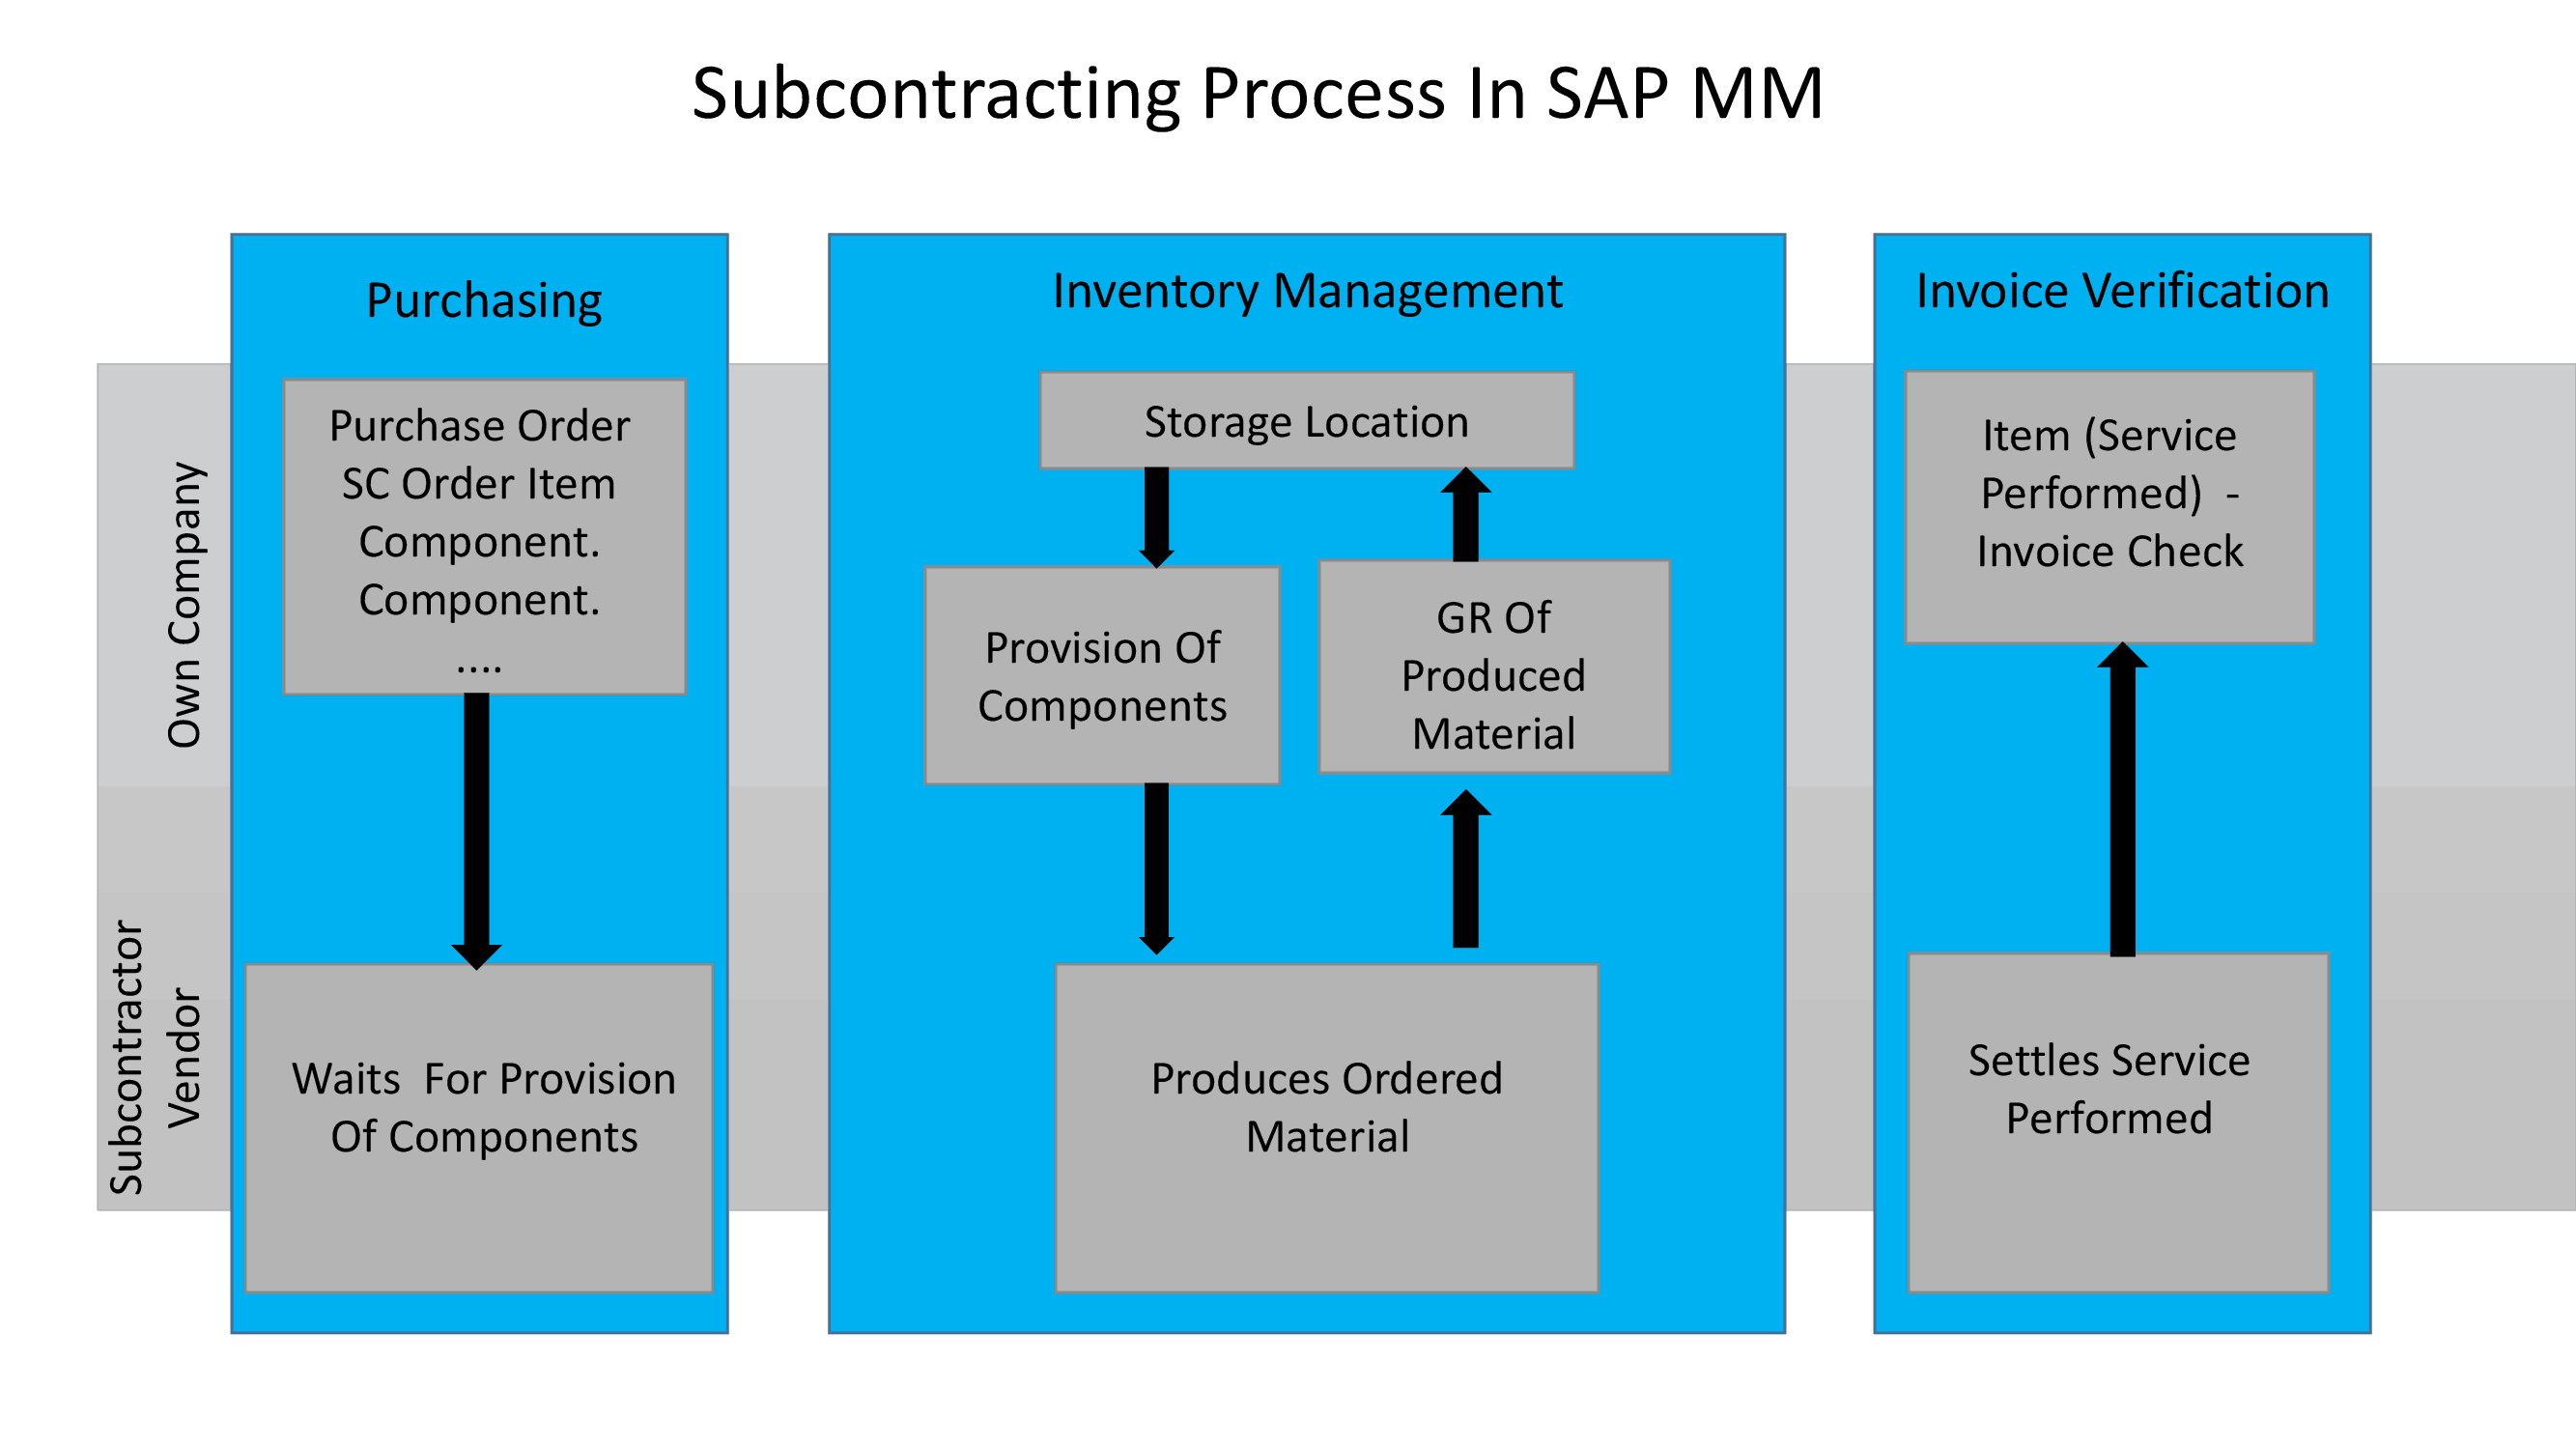 SUBCONTRACTING PROCESS IN SAP MM